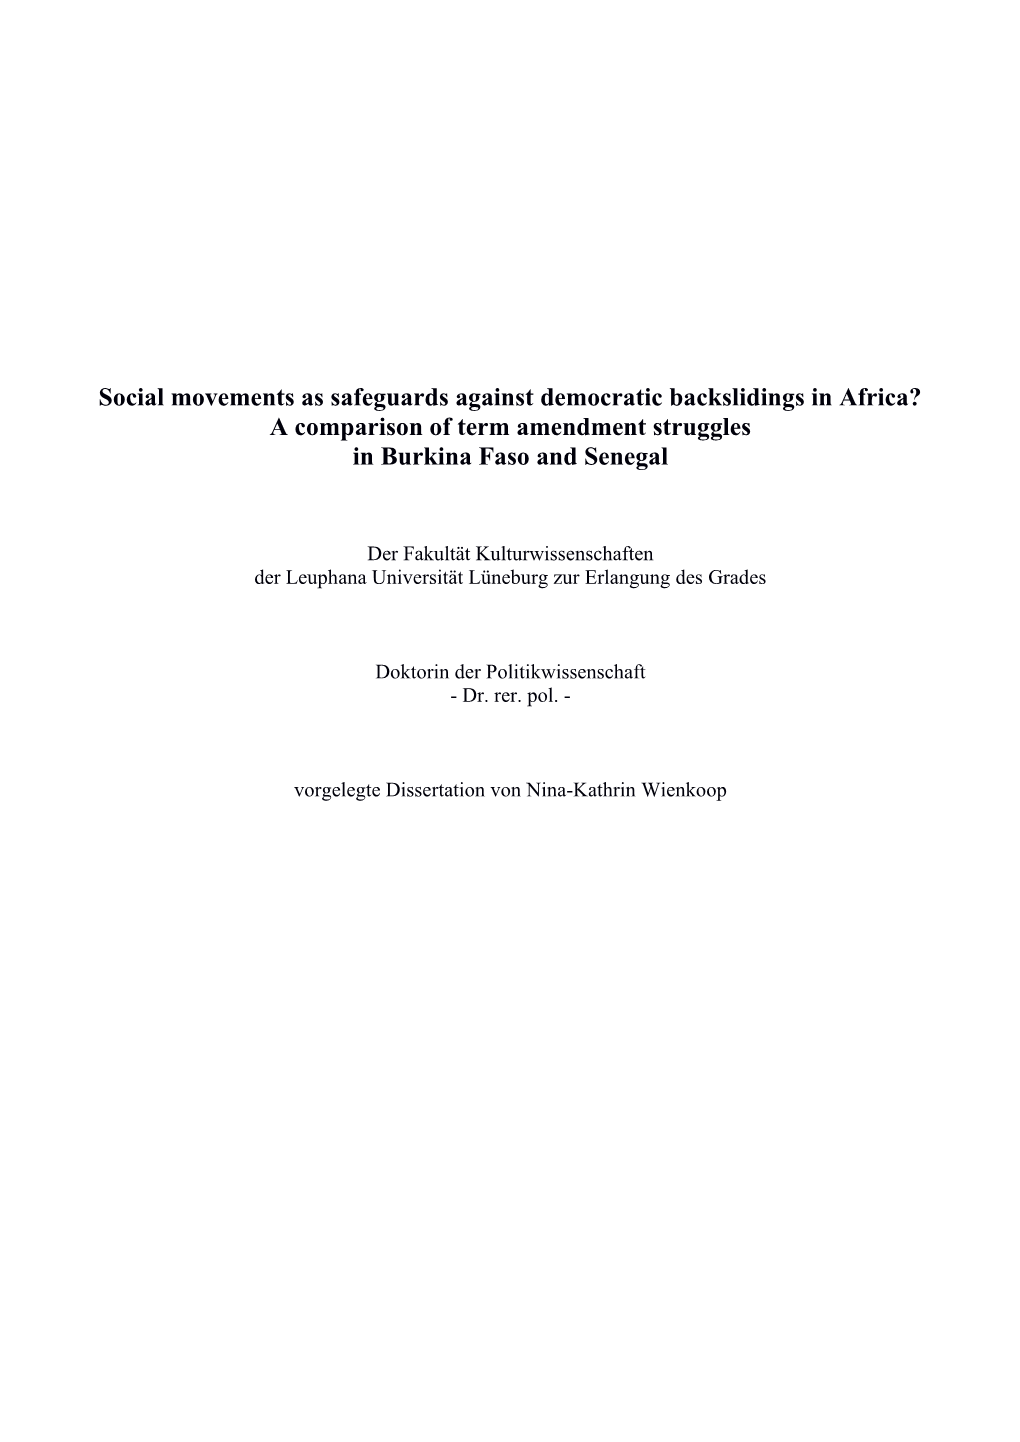 Social Movements As Safeguards Against Democratic Backslidings in Africa? a Comparison of Term Amendment Struggles in Burkina Faso and Senegal